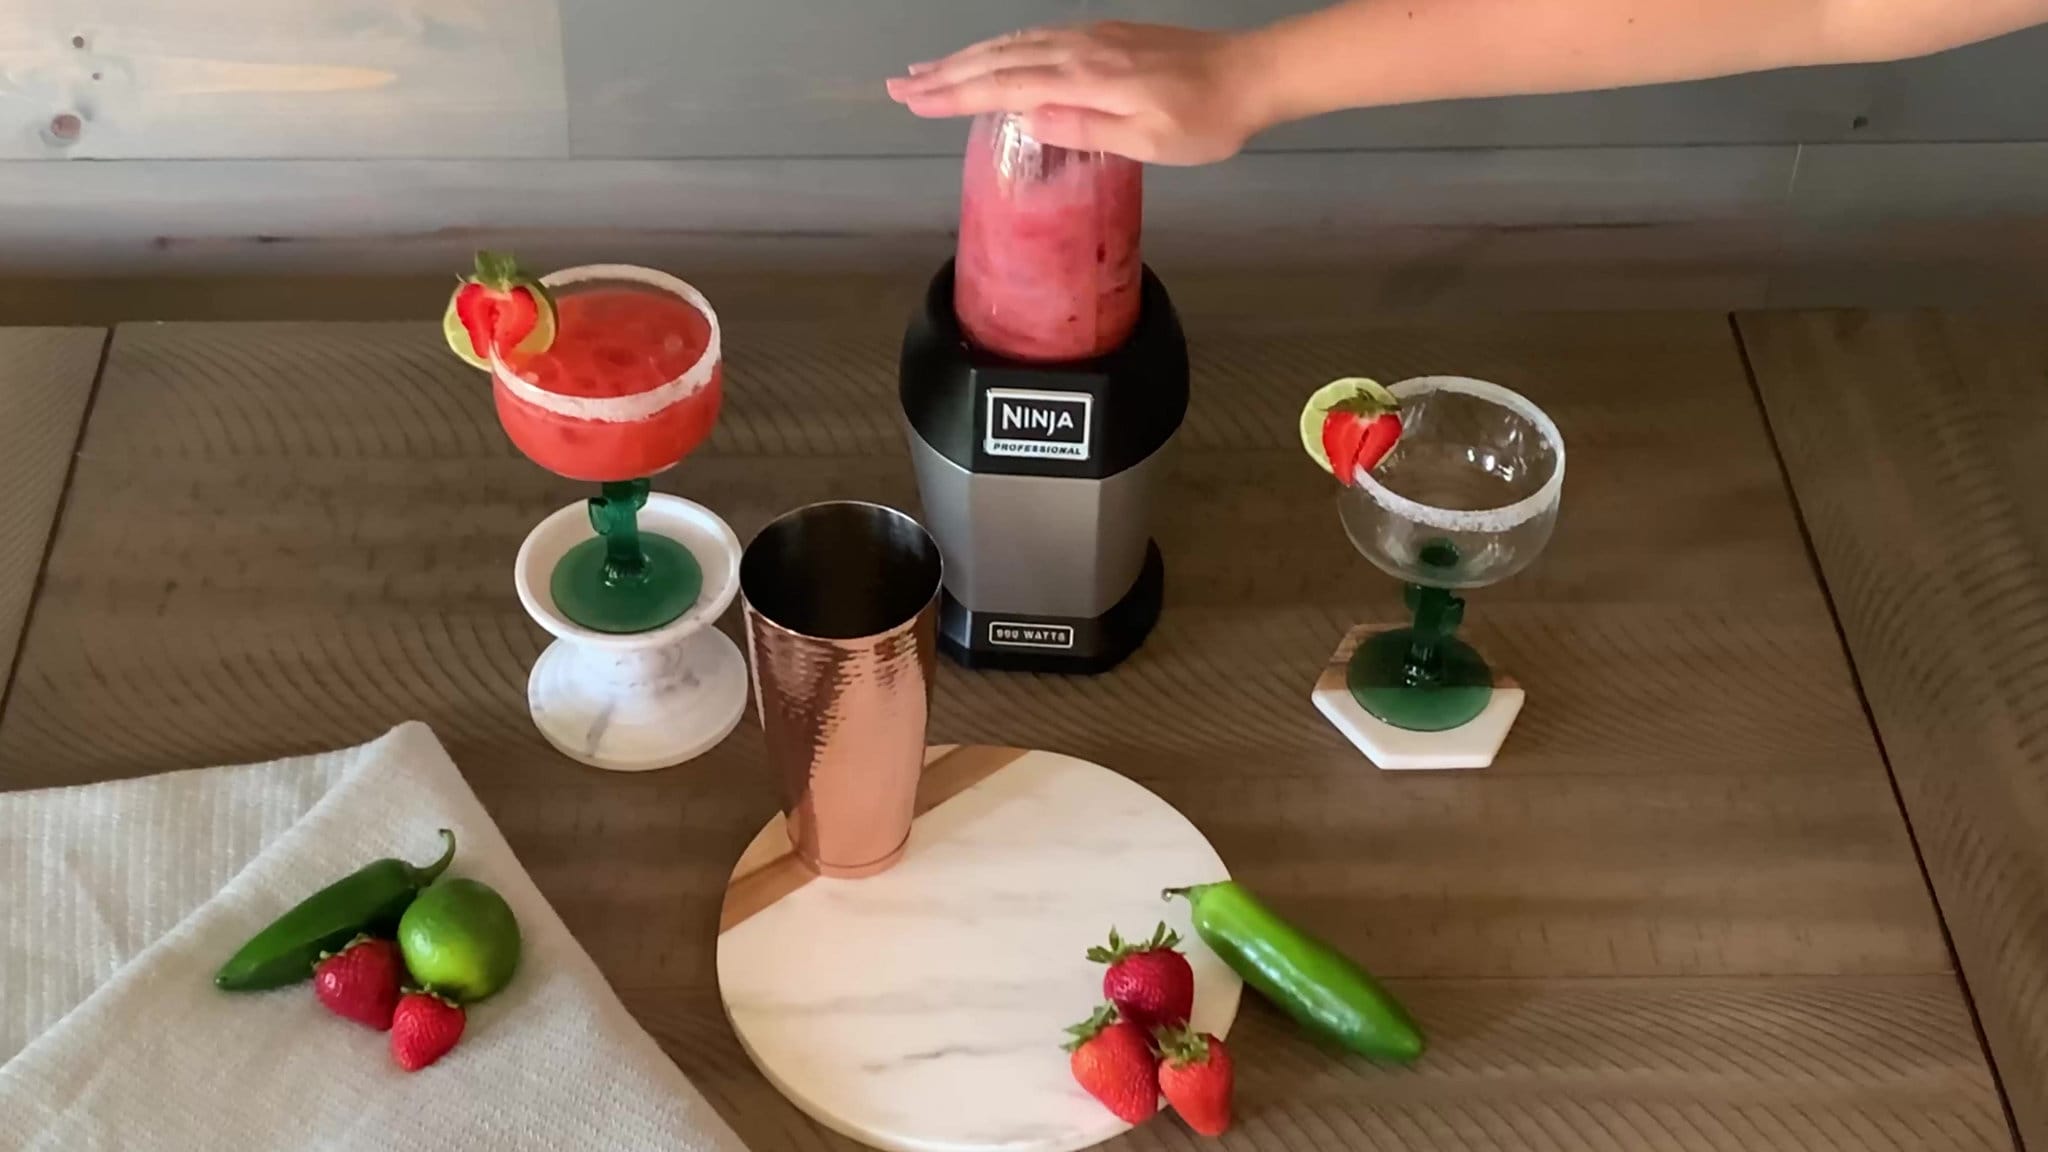 A blender blending strawberries and tequila